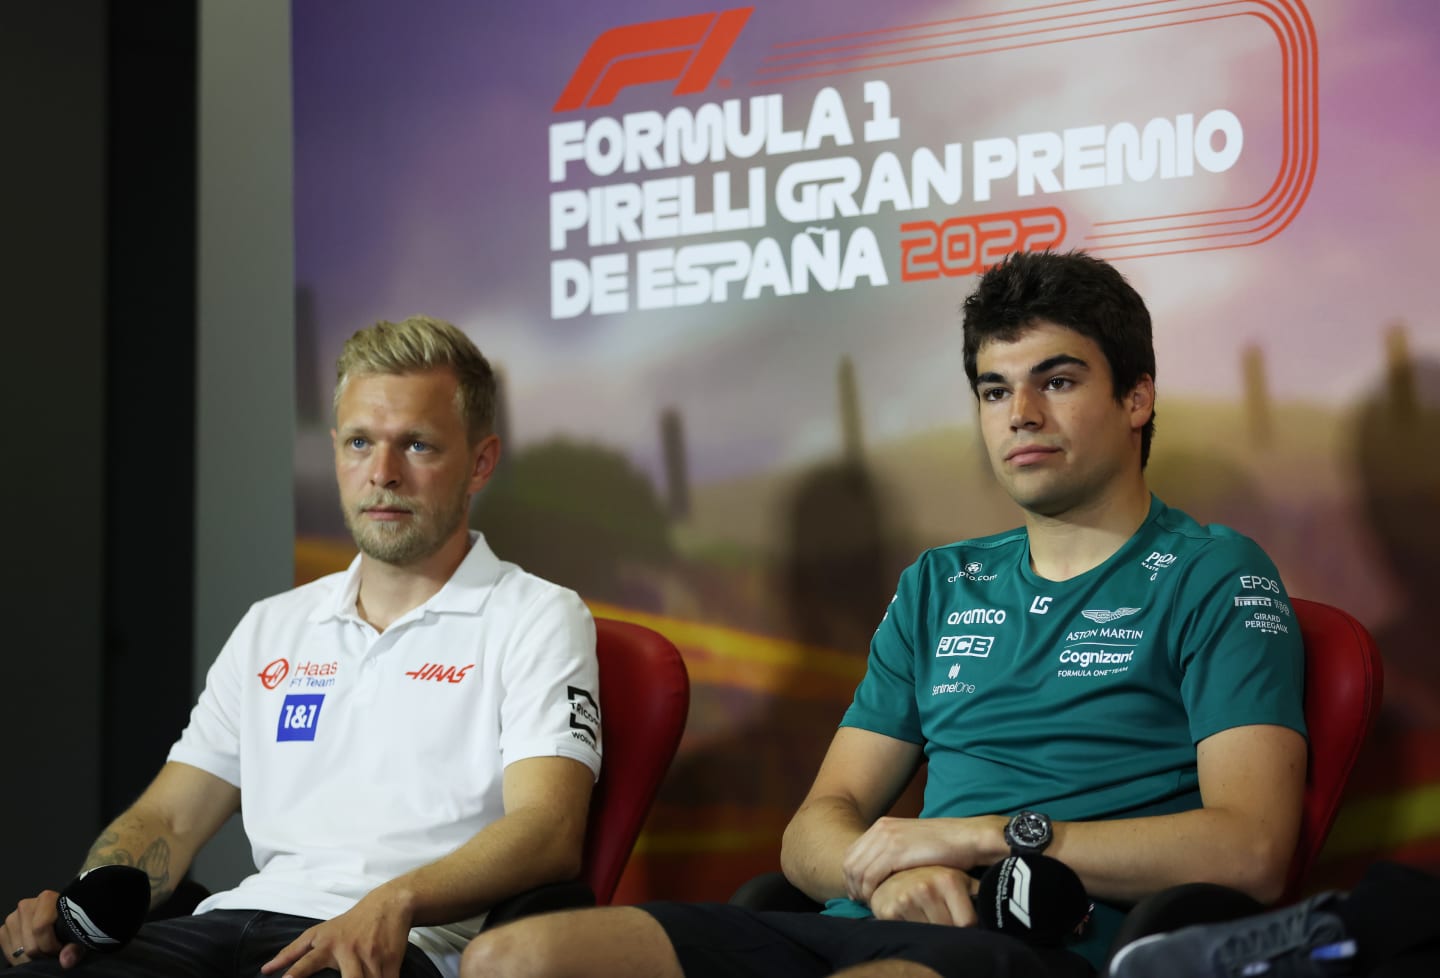 BARCELONA, SPAIN - MAY 20: Lance Stroll of Canada and Aston Martin F1 Team looks on in the Drivers Press Conference next to Kevin Magnussen of Denmark and Haas F1 prior to practice ahead of the F1 Grand Prix of Spain at Circuit de Barcelona-Catalunya on May 20, 2022 in Barcelona, Spain. (Photo by Bryn Lennon/Getty Images)